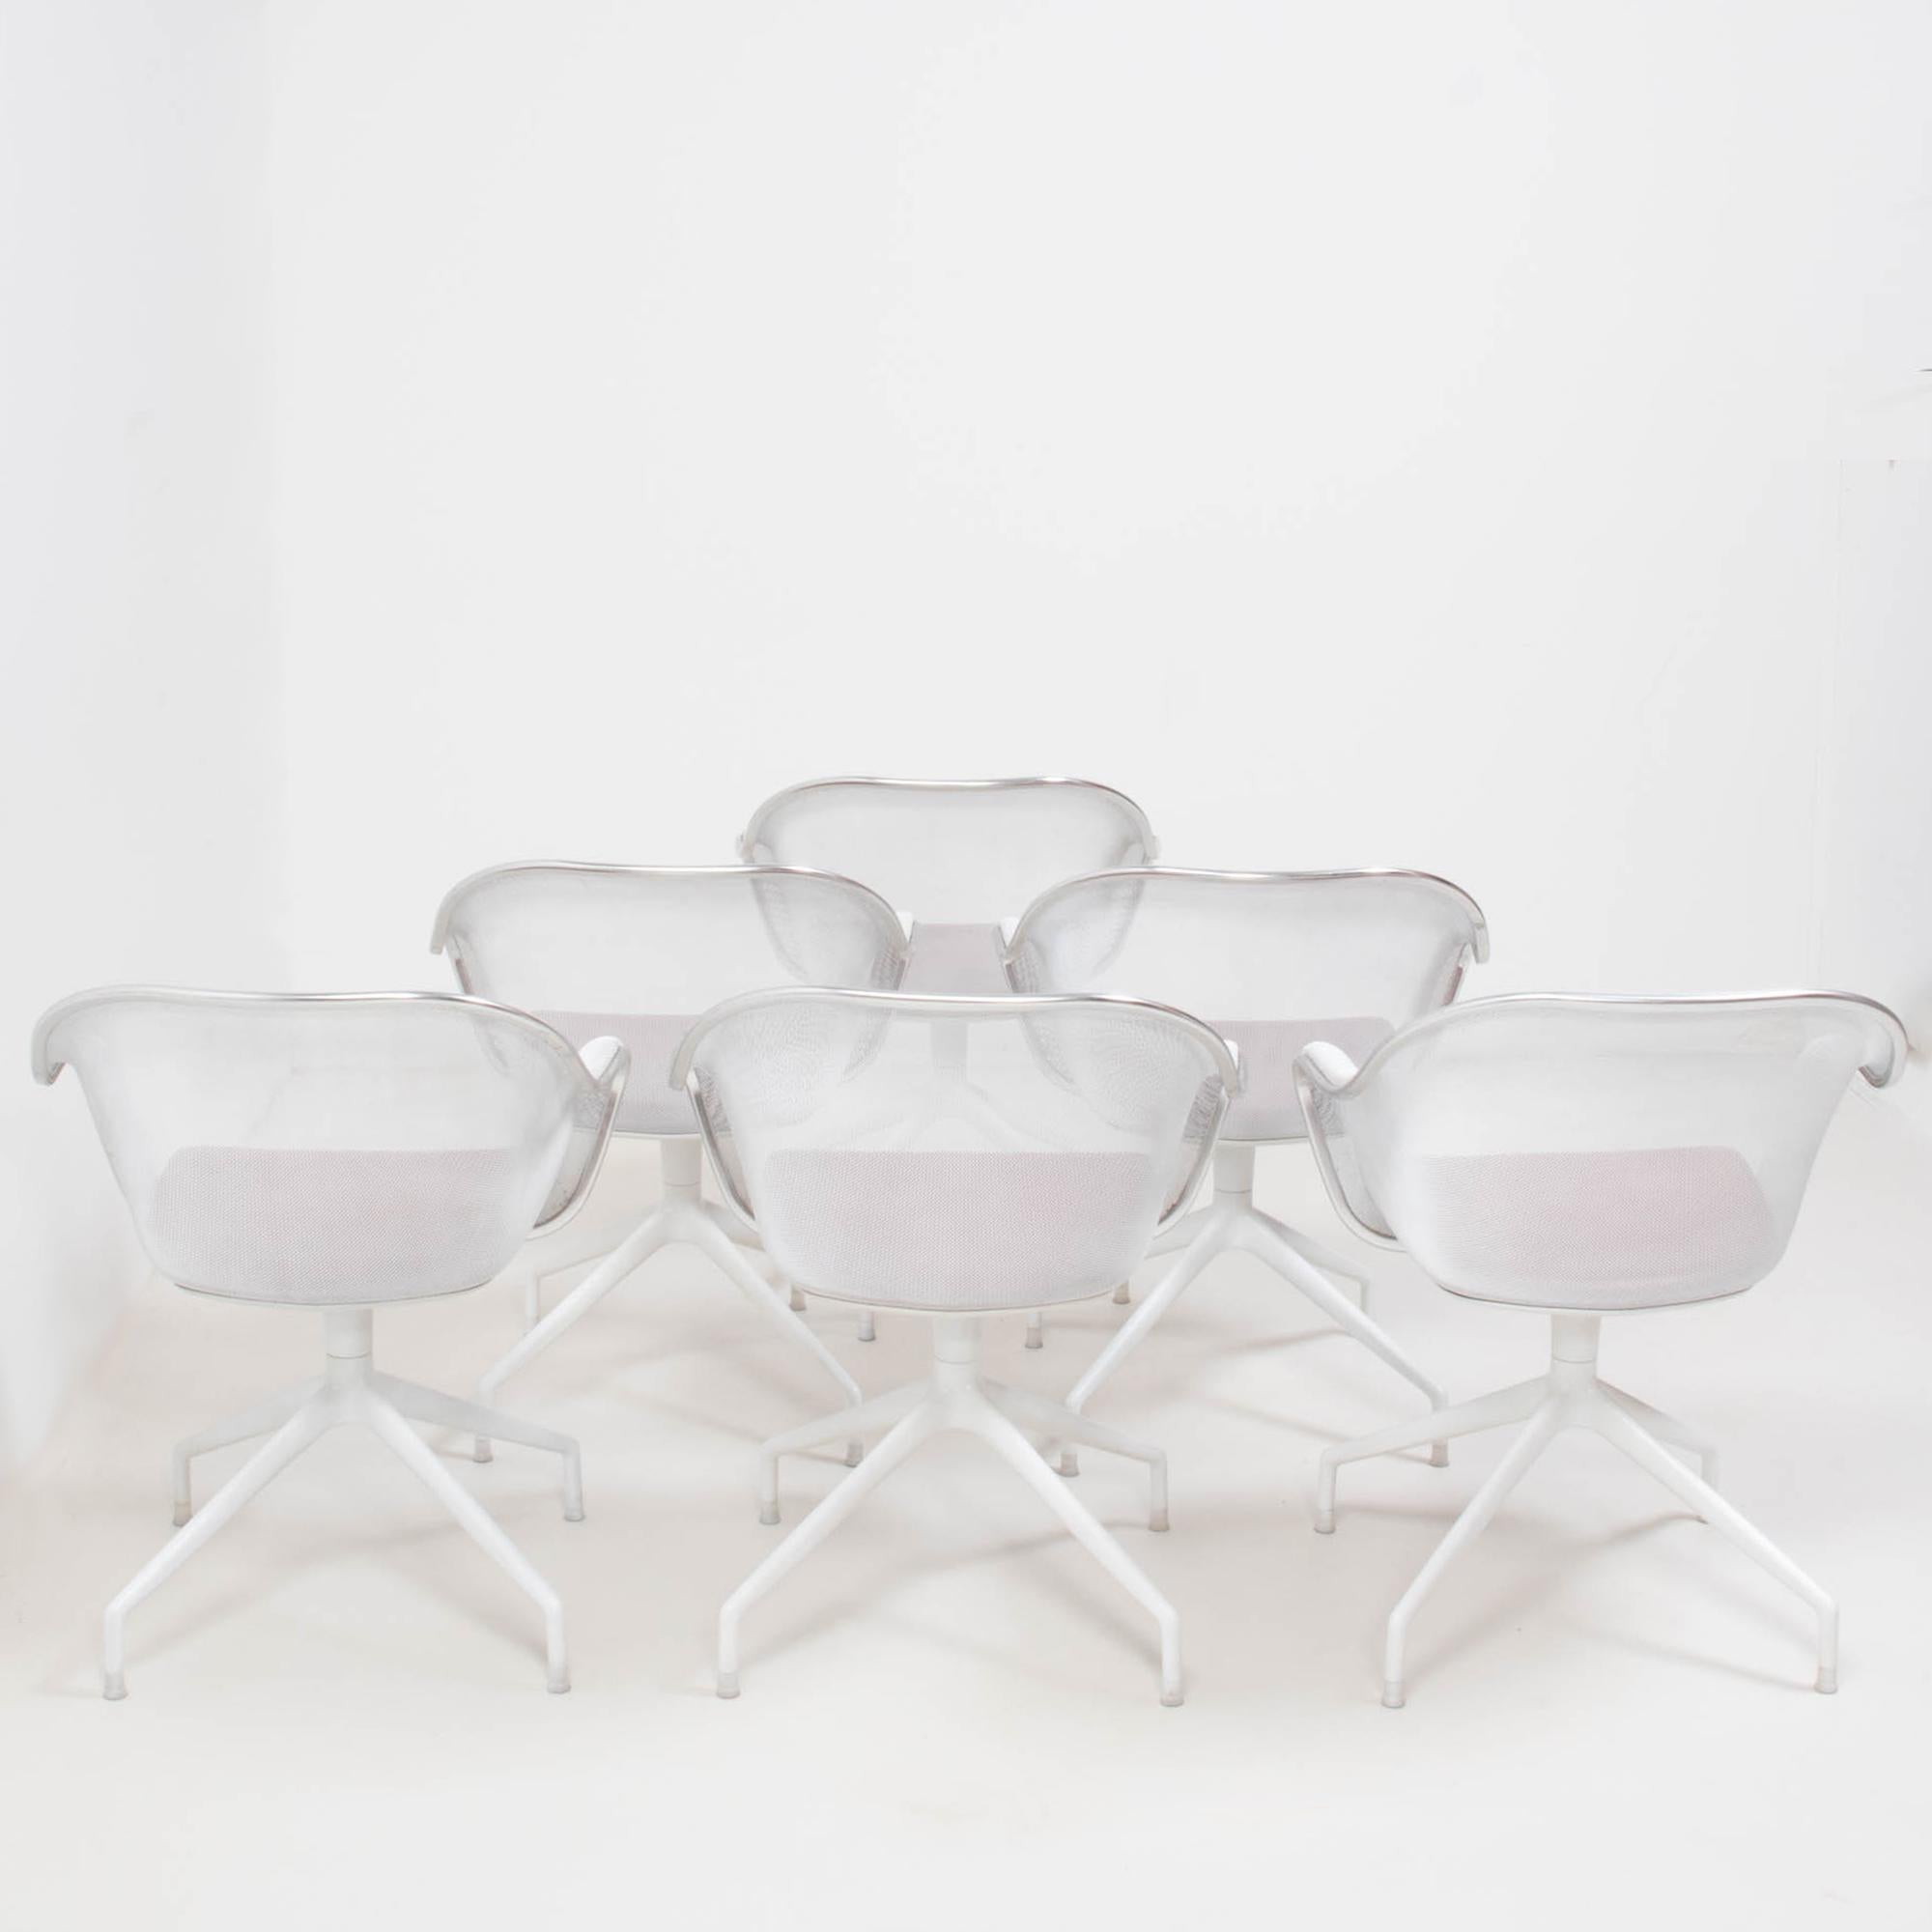 B&B Italia by Antonio Citterio Luta White and Red Leather Swivel Dining Chairs In Good Condition For Sale In London, GB